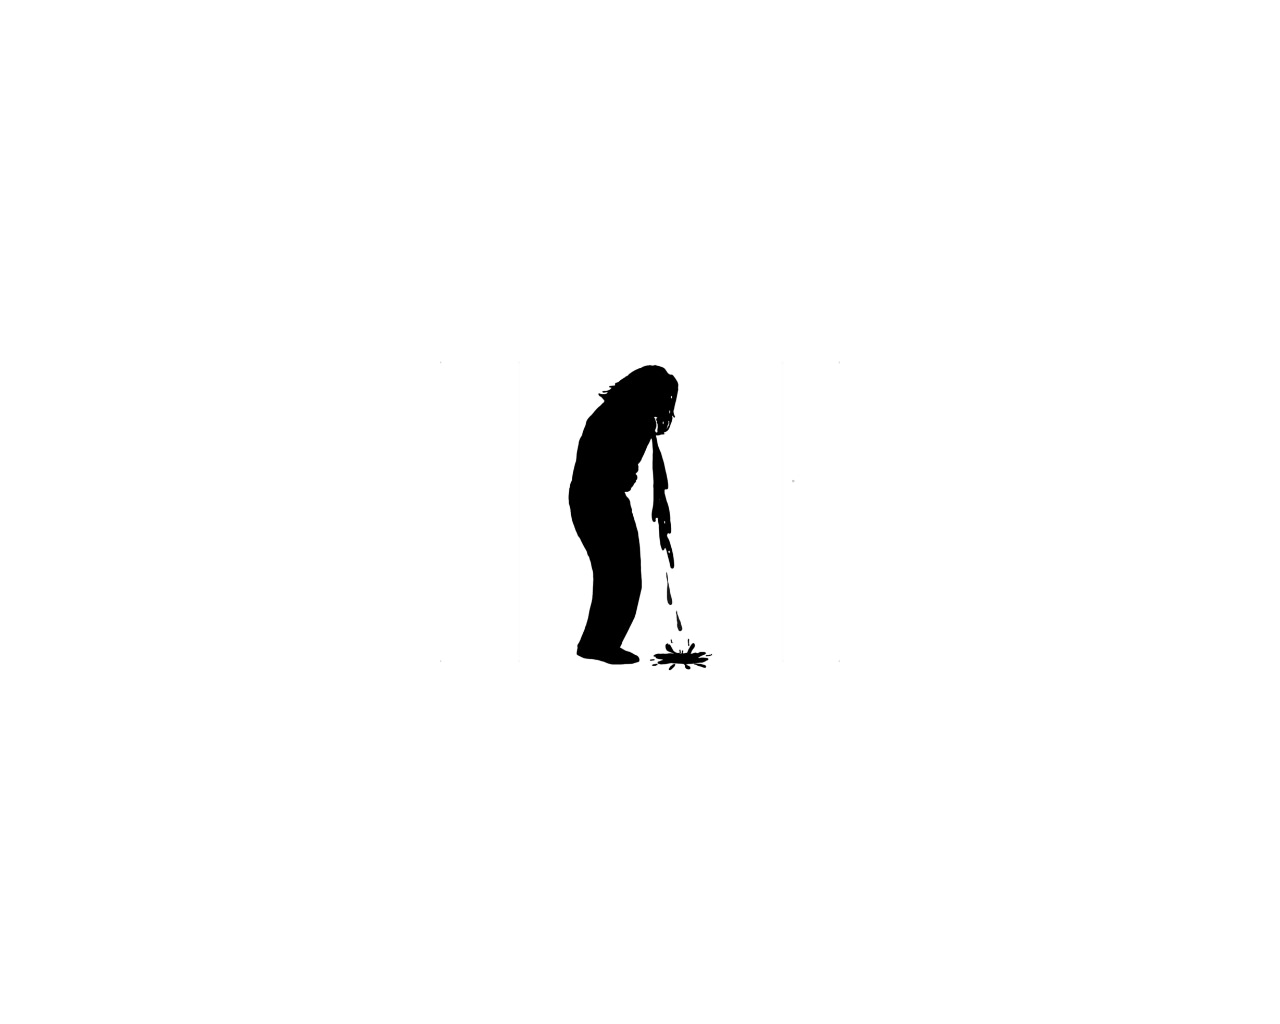 vomiting silhouette small